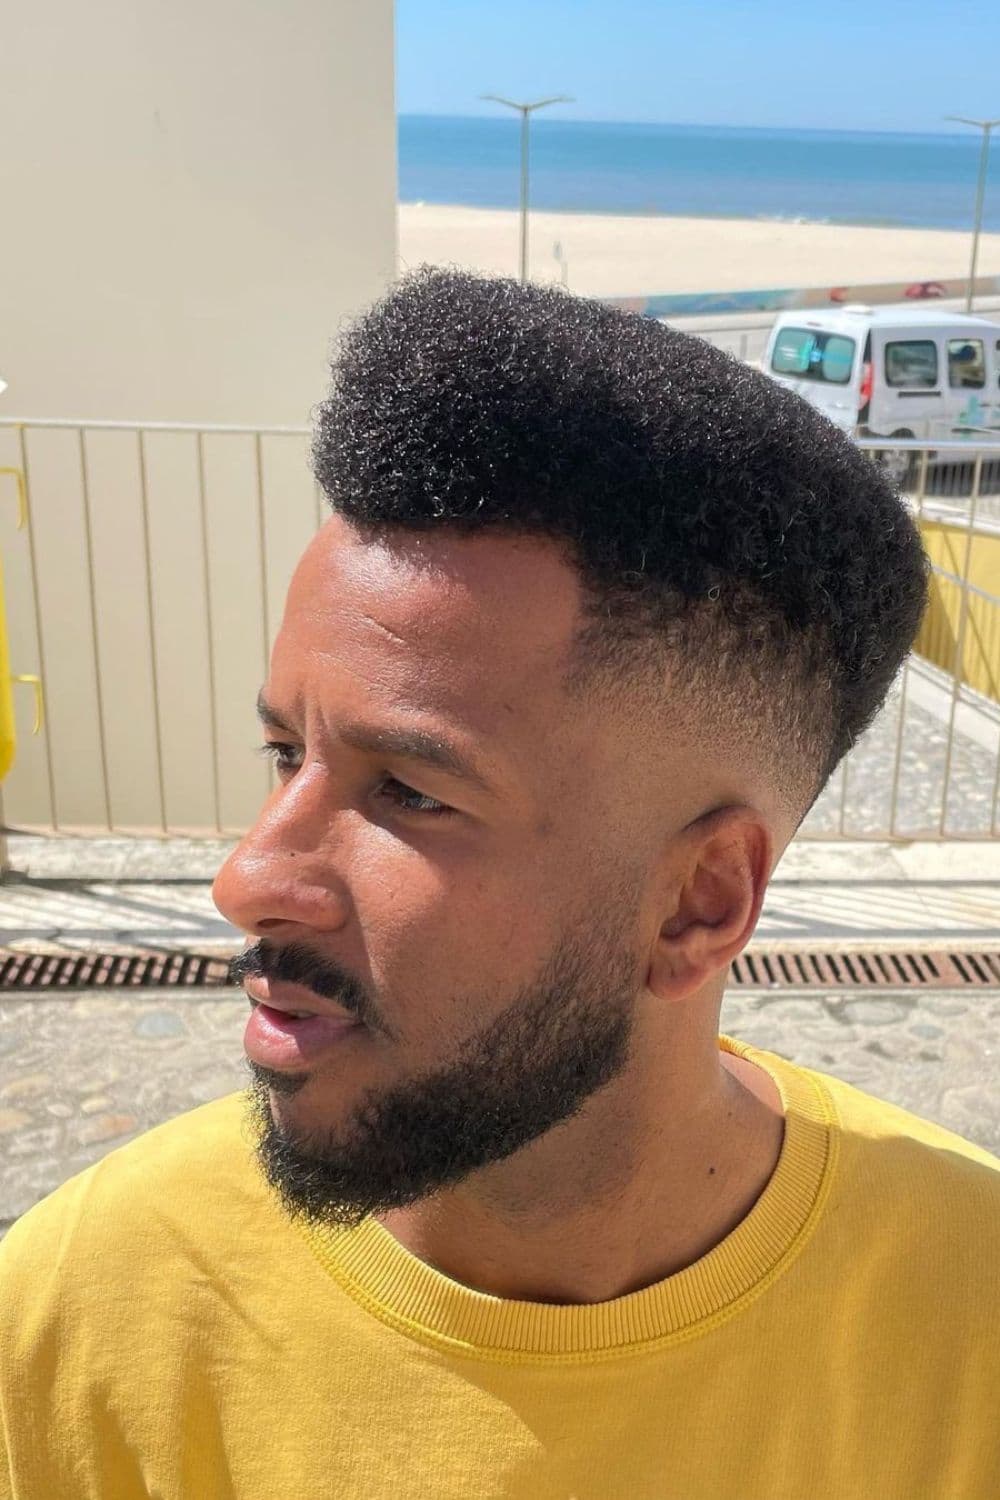 A man with an Afro cut.